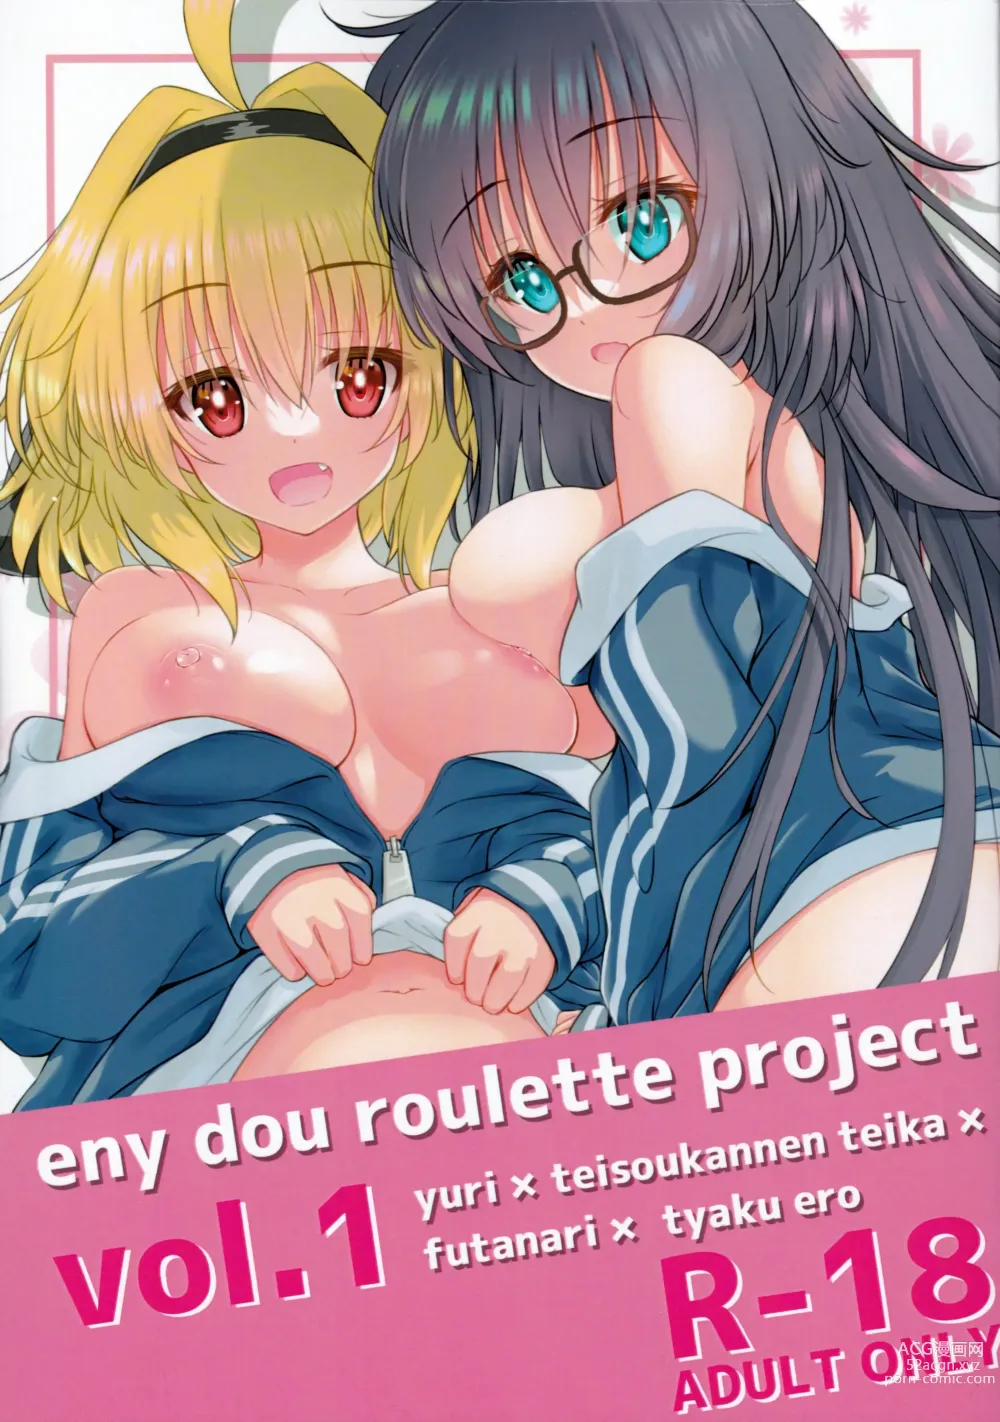 Page 1 of doujinshi Eny Dou Roulette Project Vol. 1